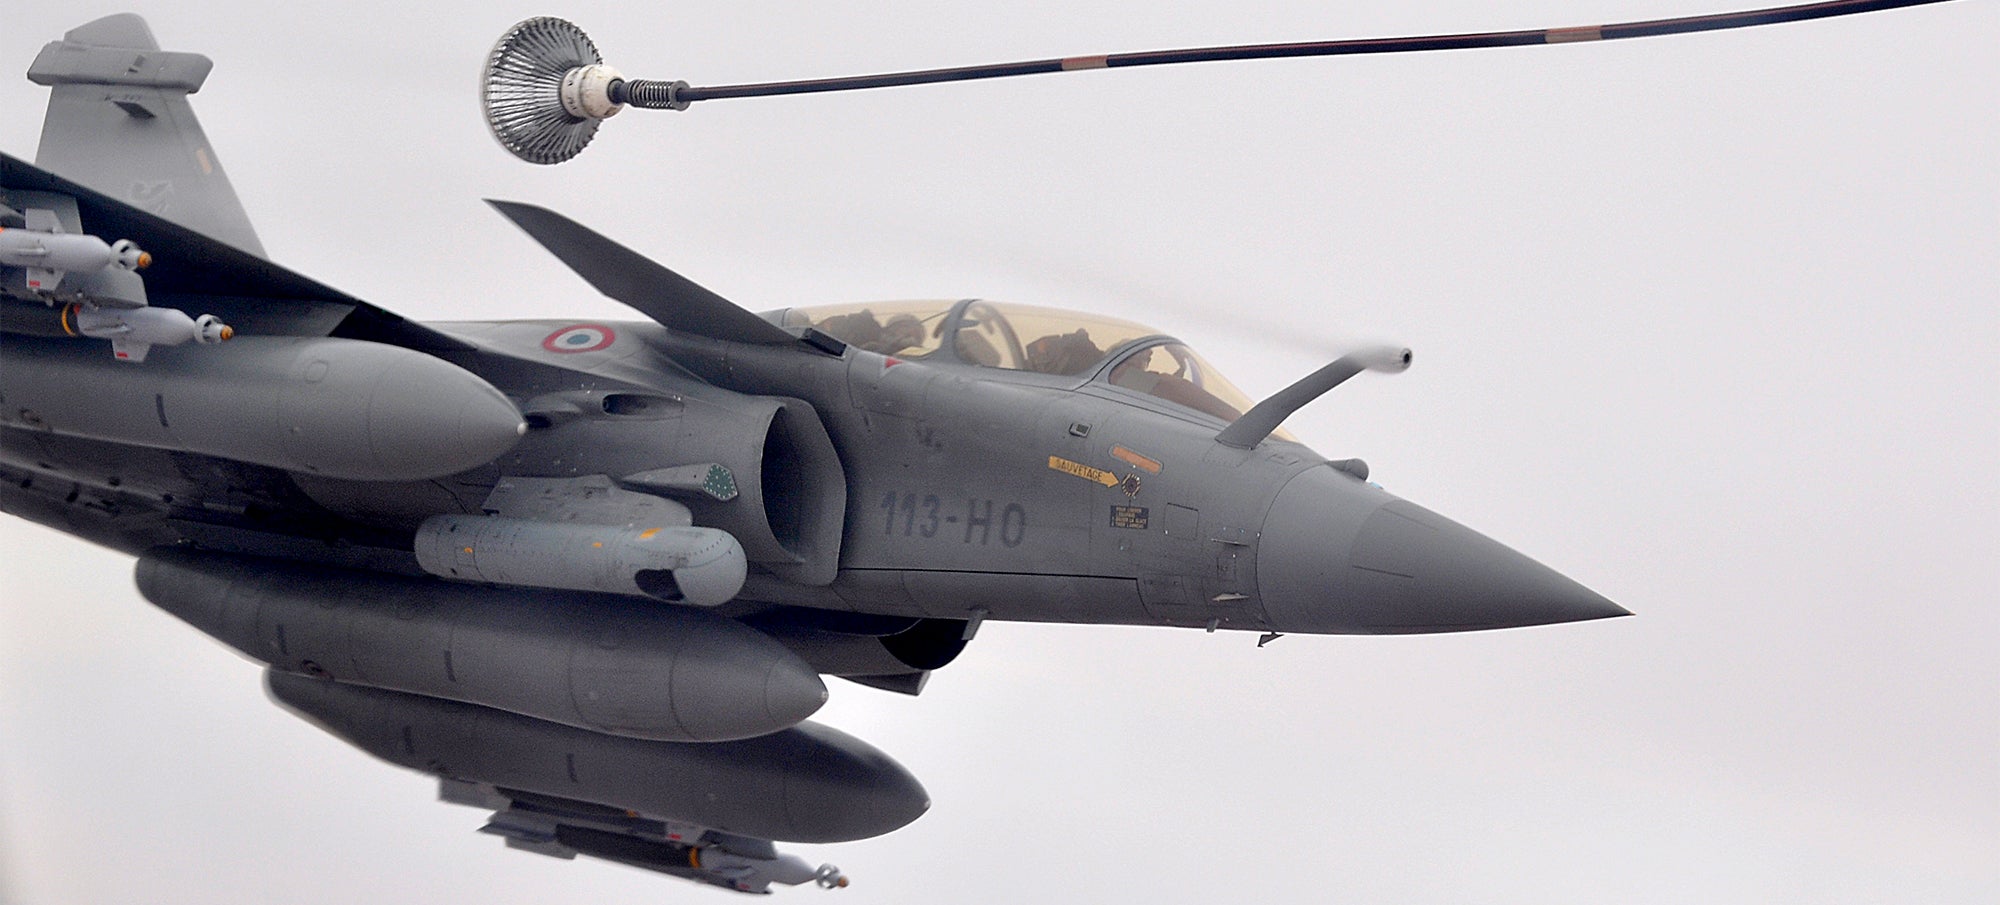 The Rafale really looks like a fighter from the future in these images